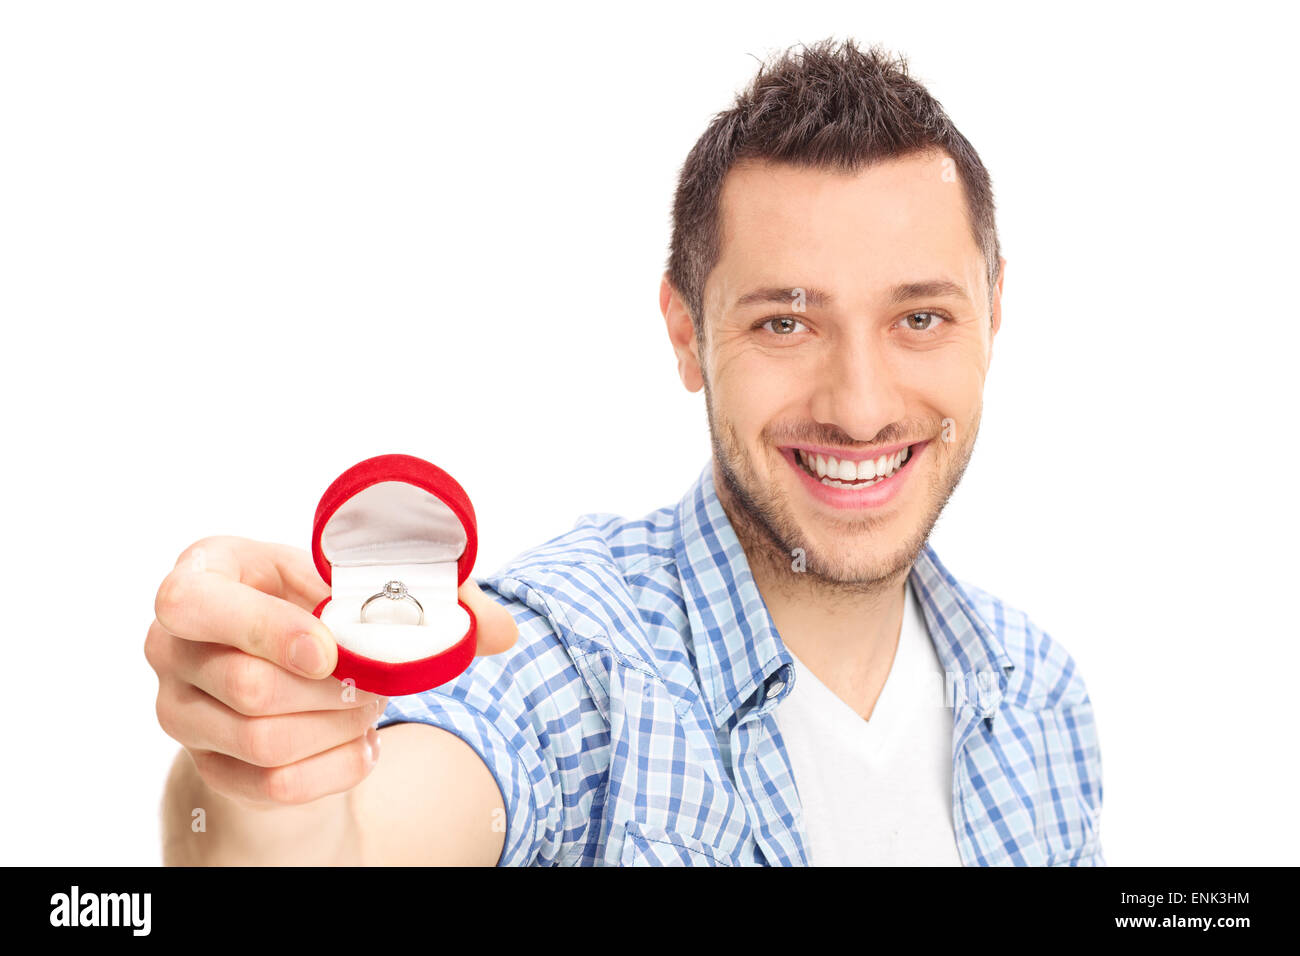 Young man holding an engagement ring and looking at the camera isolated on white background Stock Photo